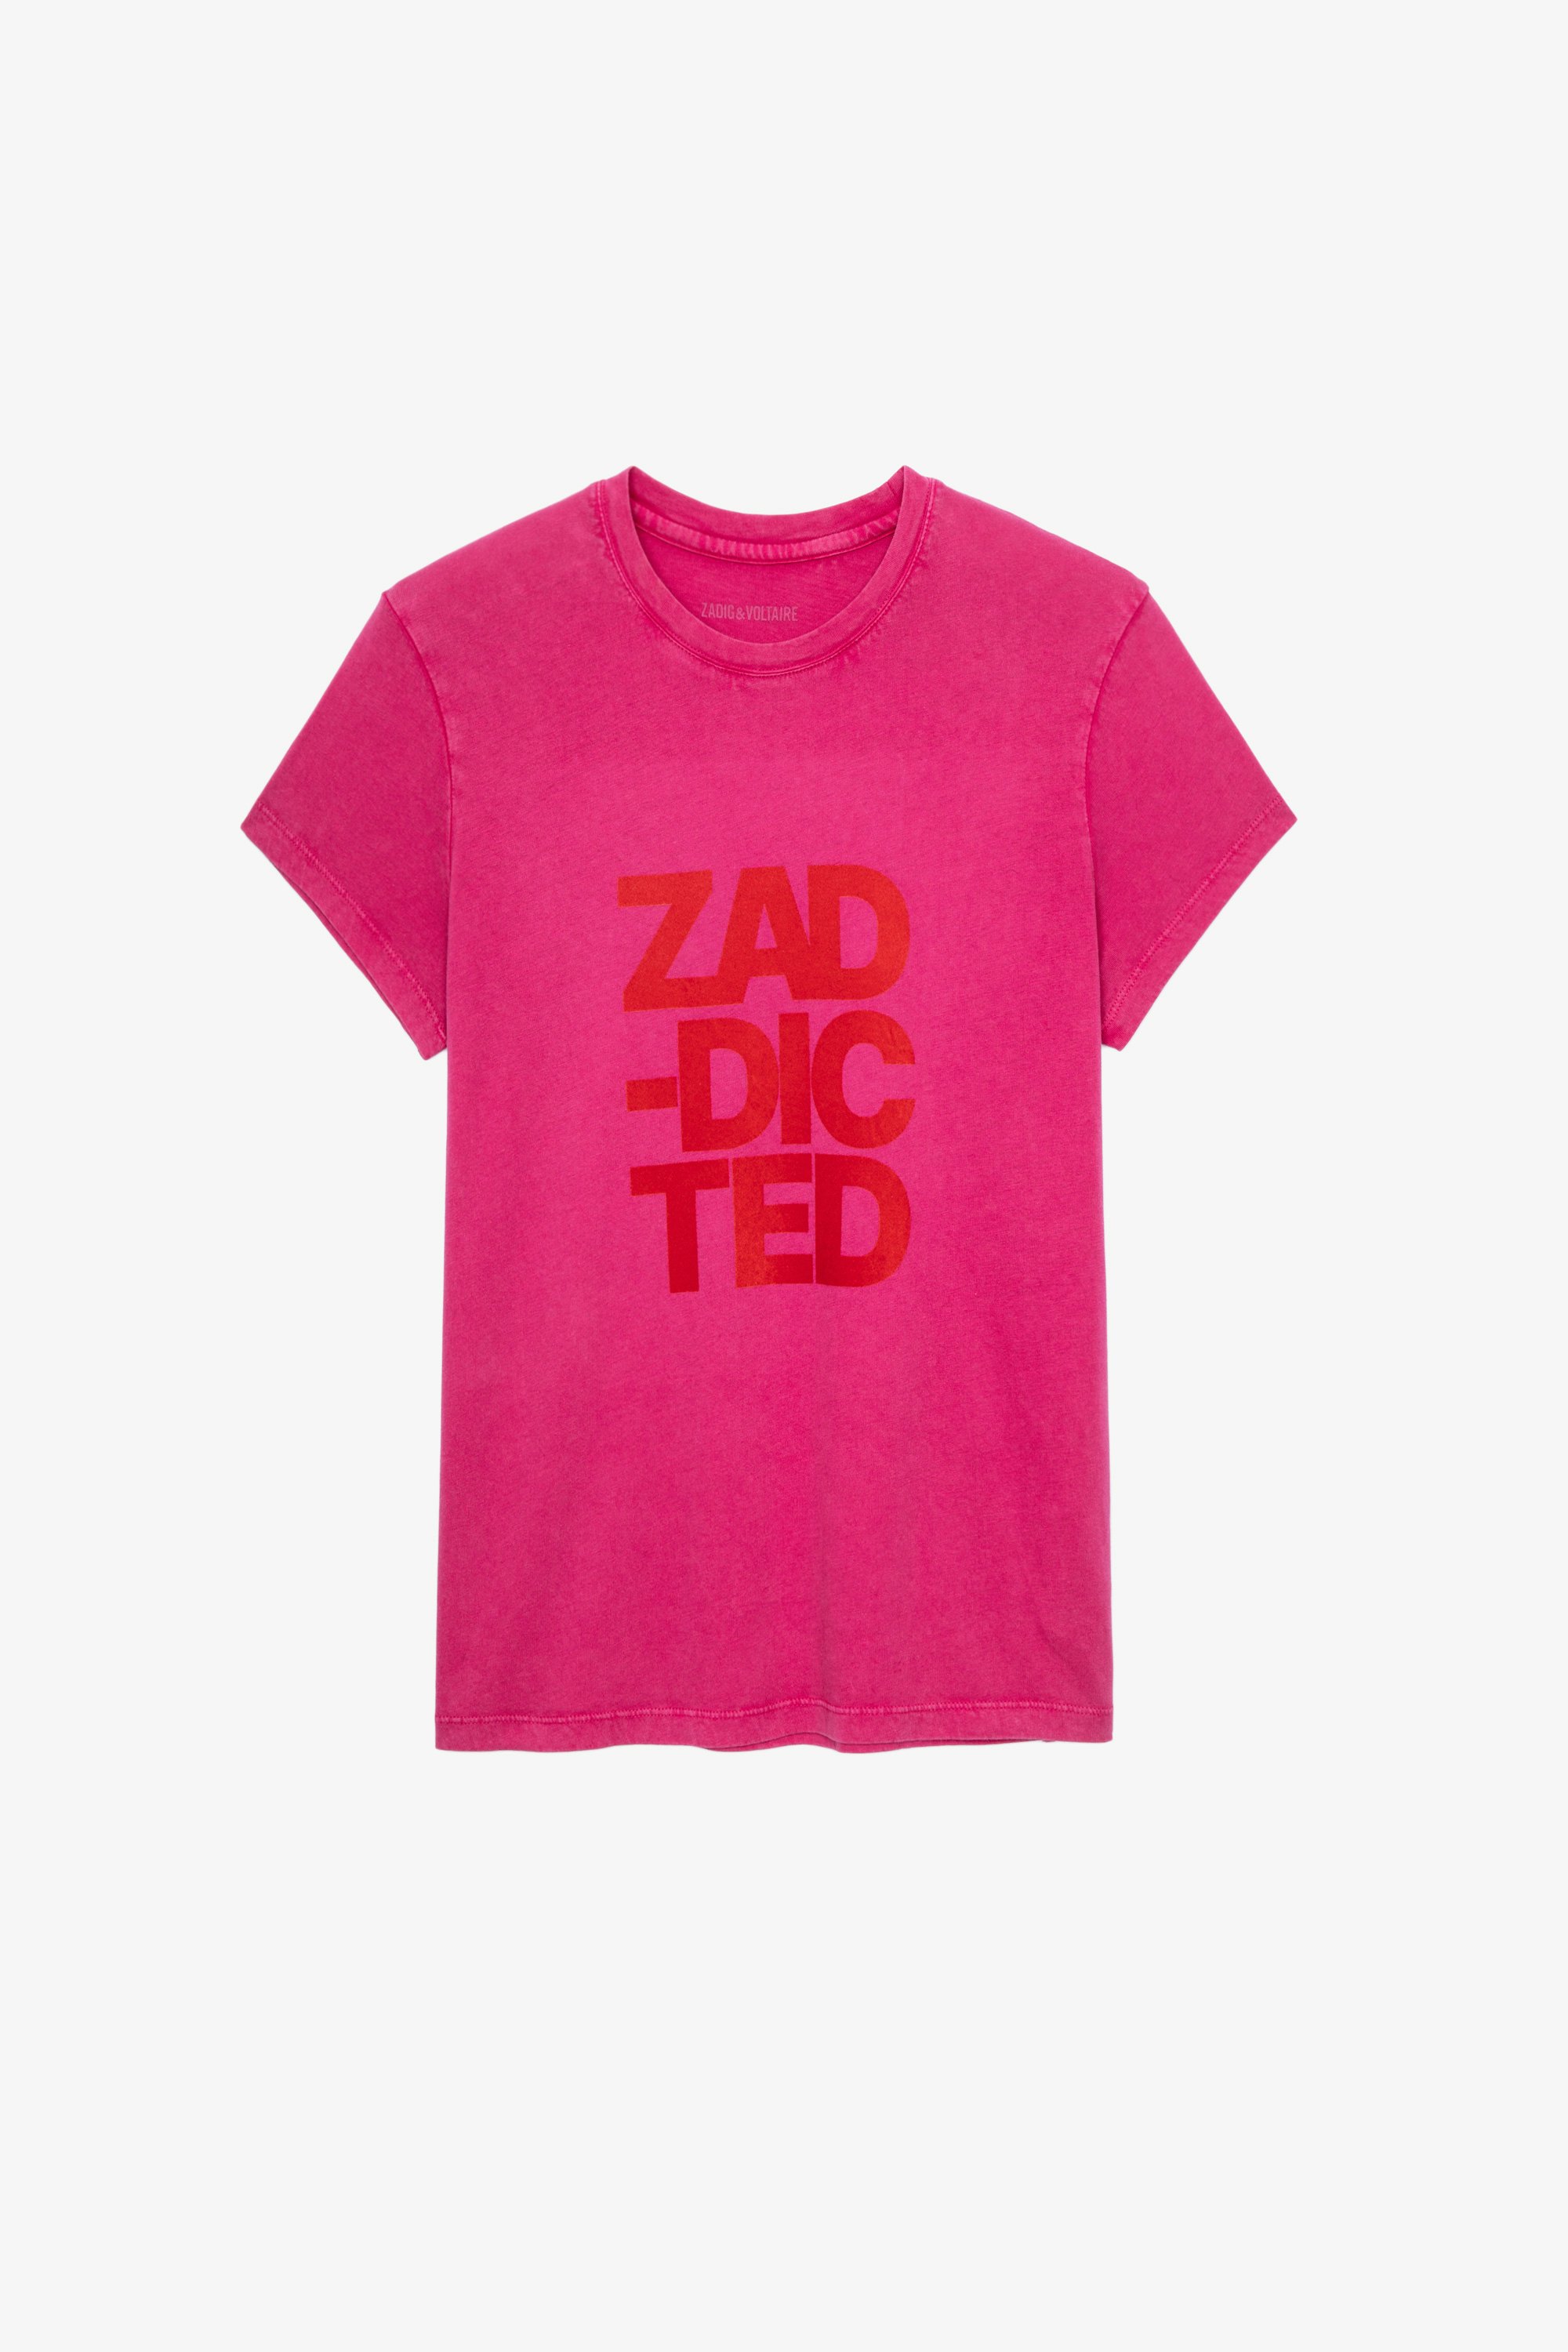 Walk Amour Ｔシャツ Women's pink cotton T-shirt with “Zaddicted” slogan